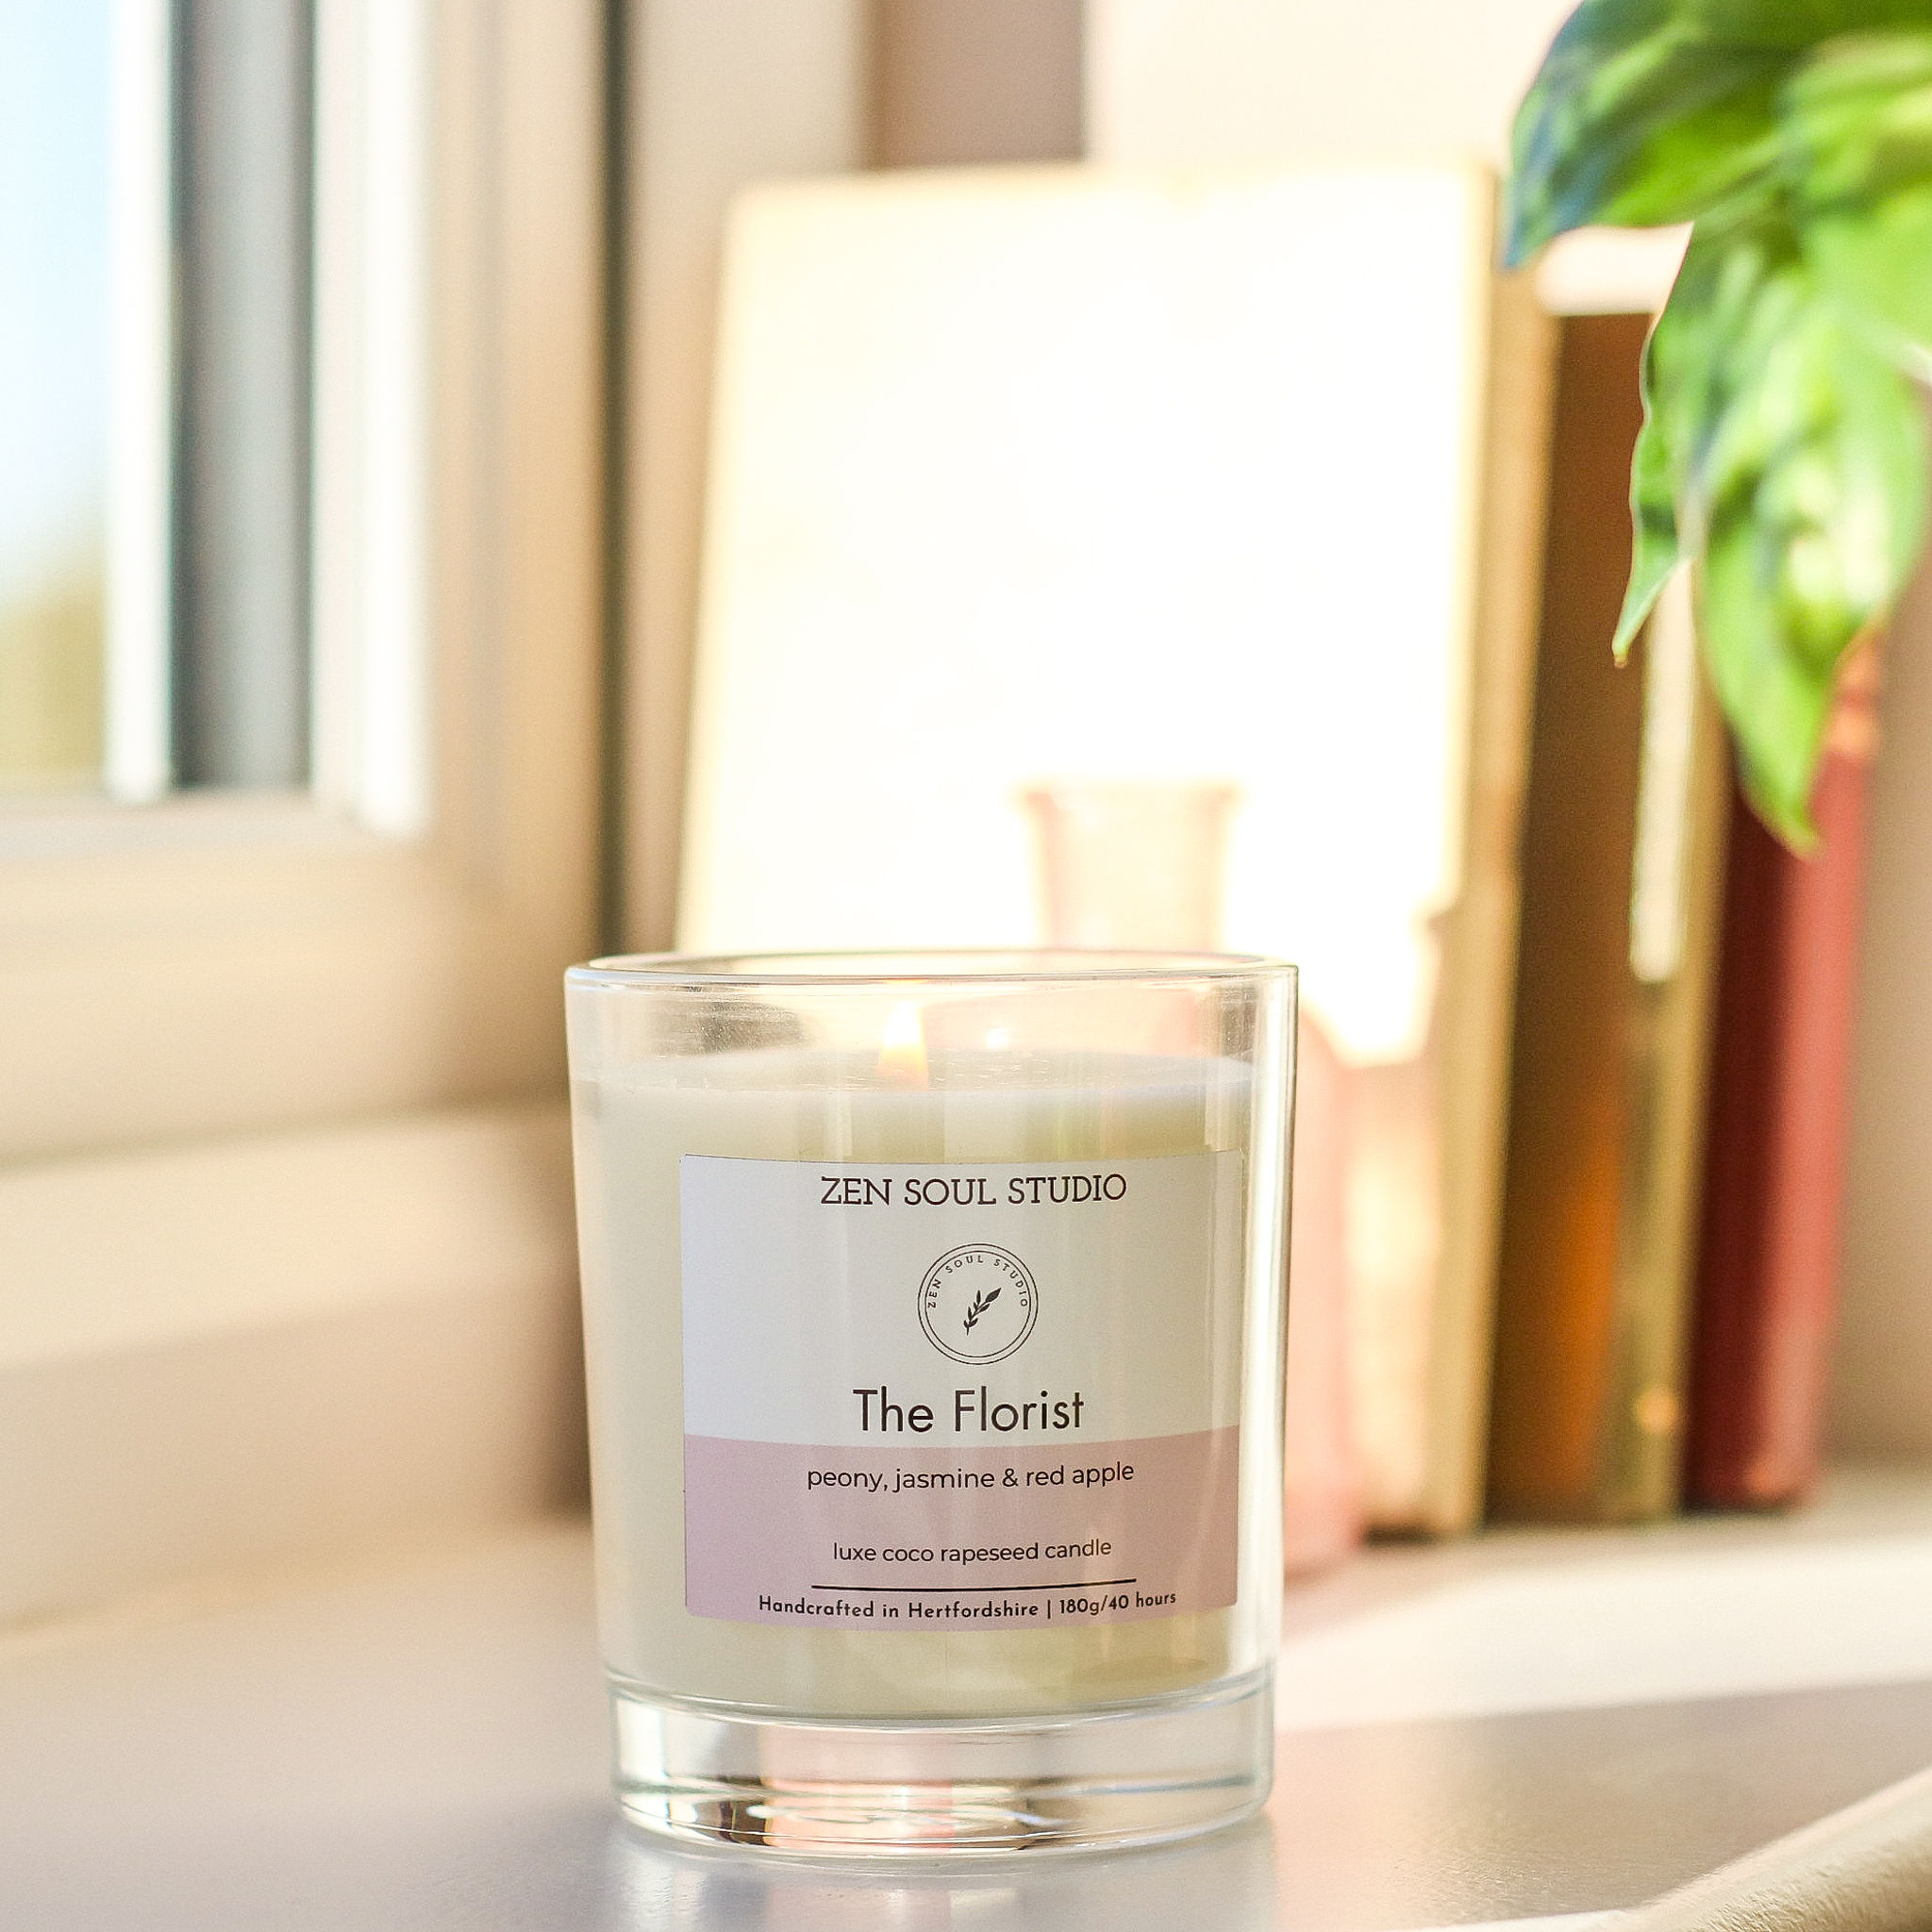 The Florist Coco Rapeseed Luxe Candle